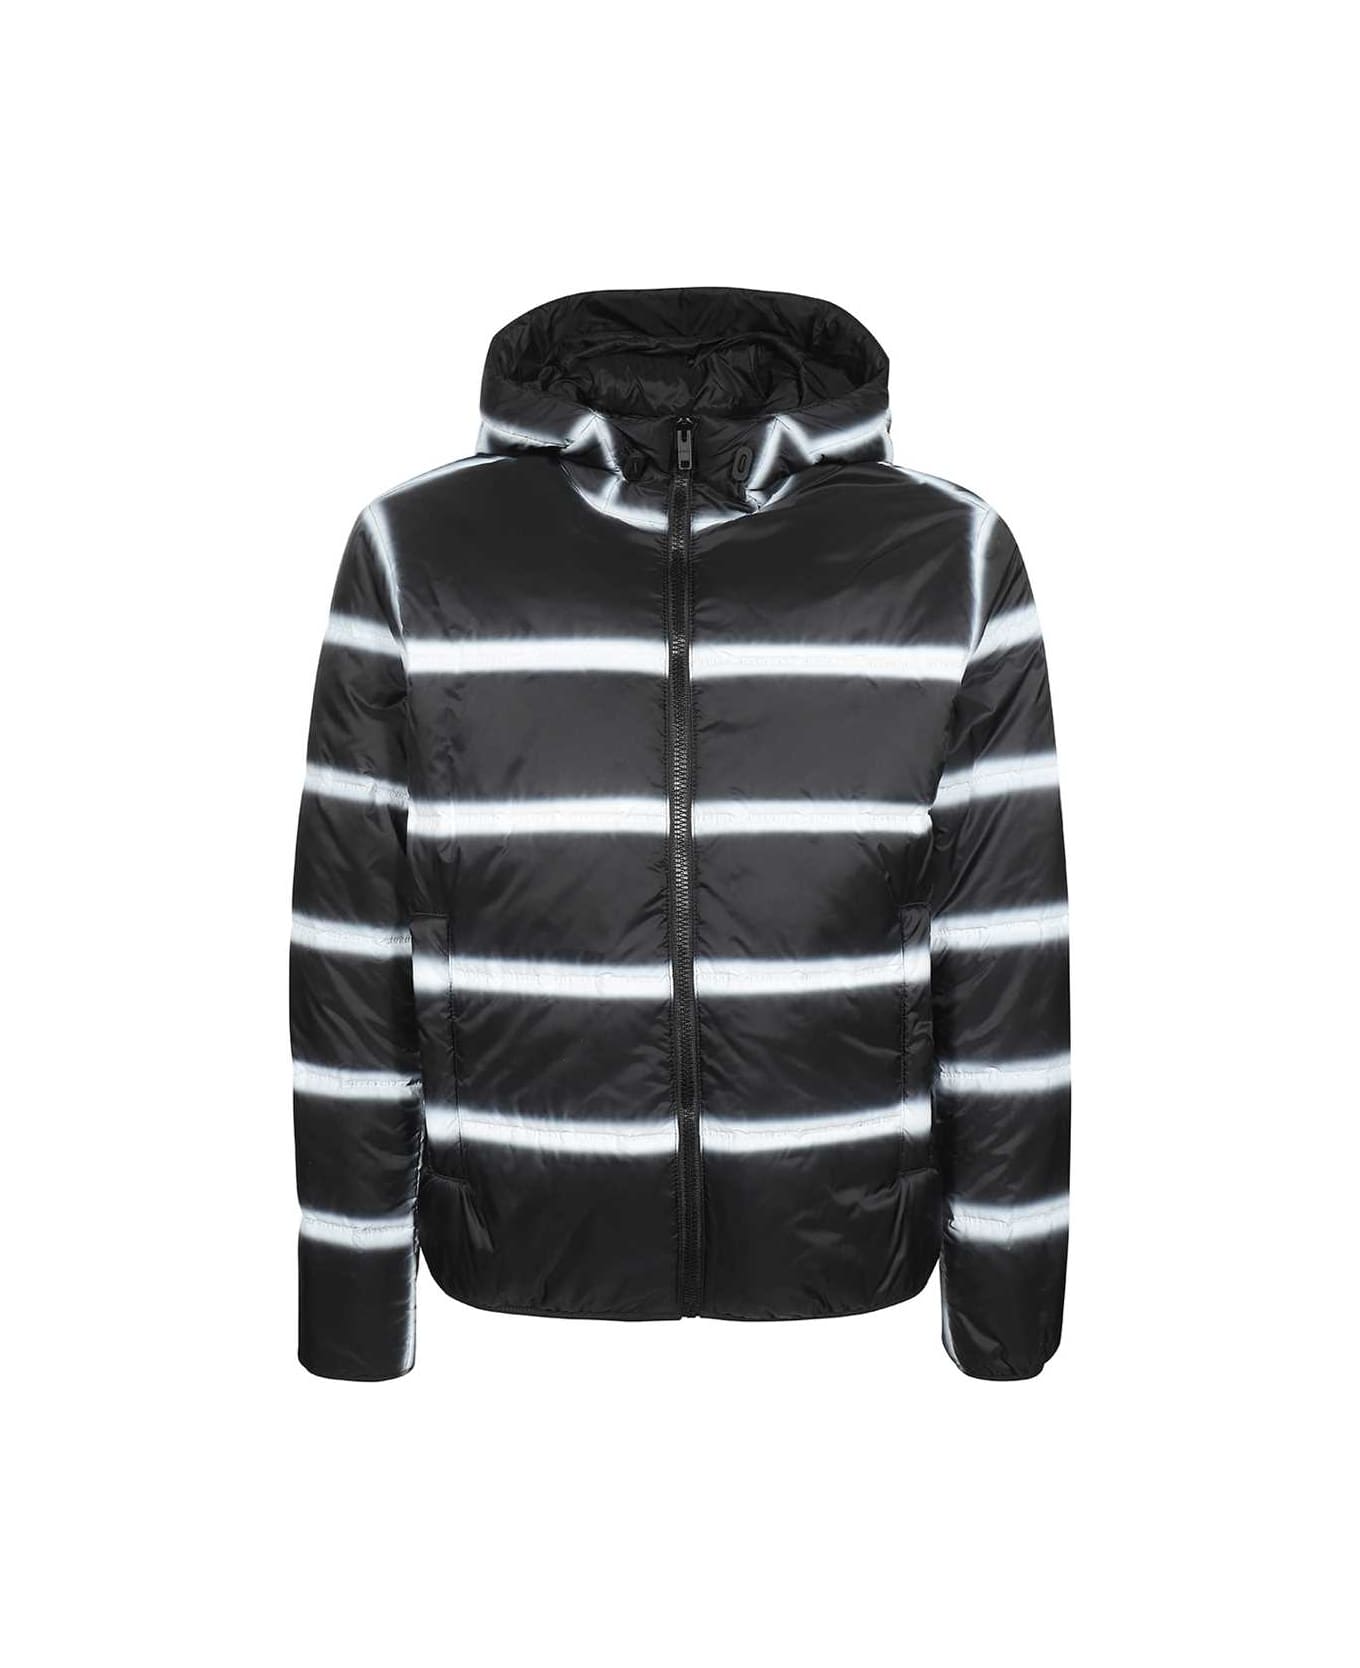 Givenchy Hooded Puffer Jacket - black